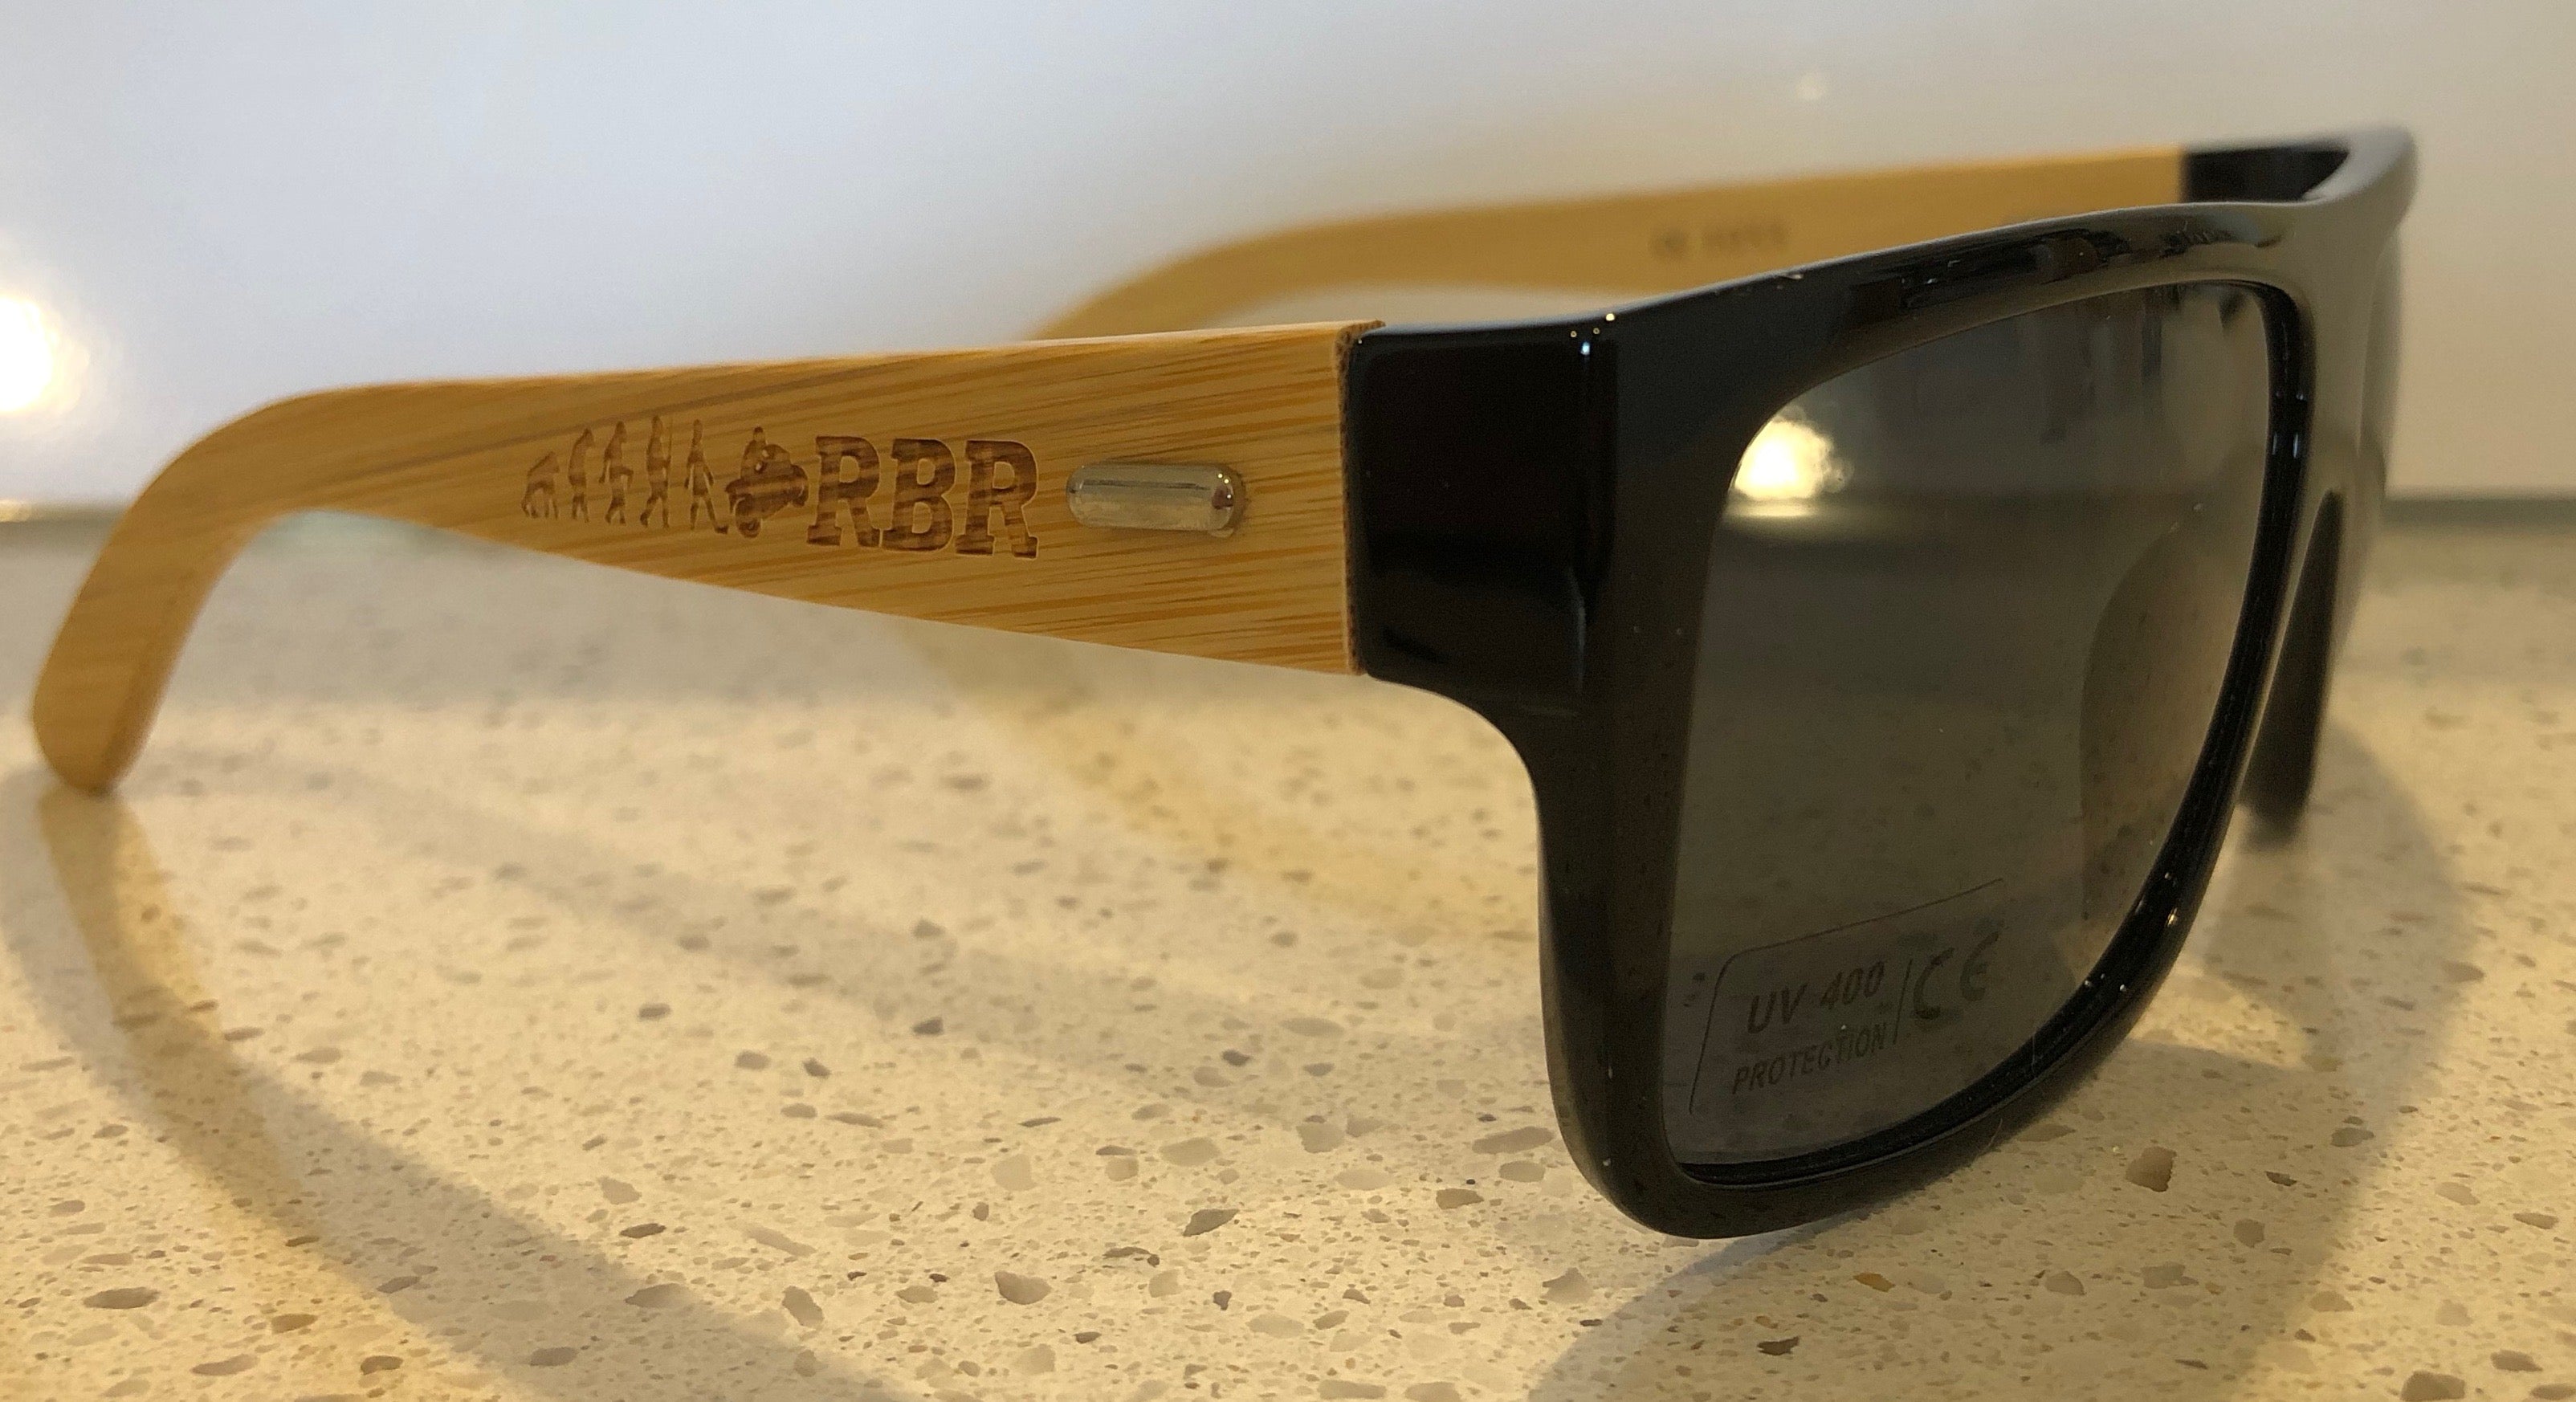 Square Oakley Style Sunglasses with Laser Printed Bamboo Arms